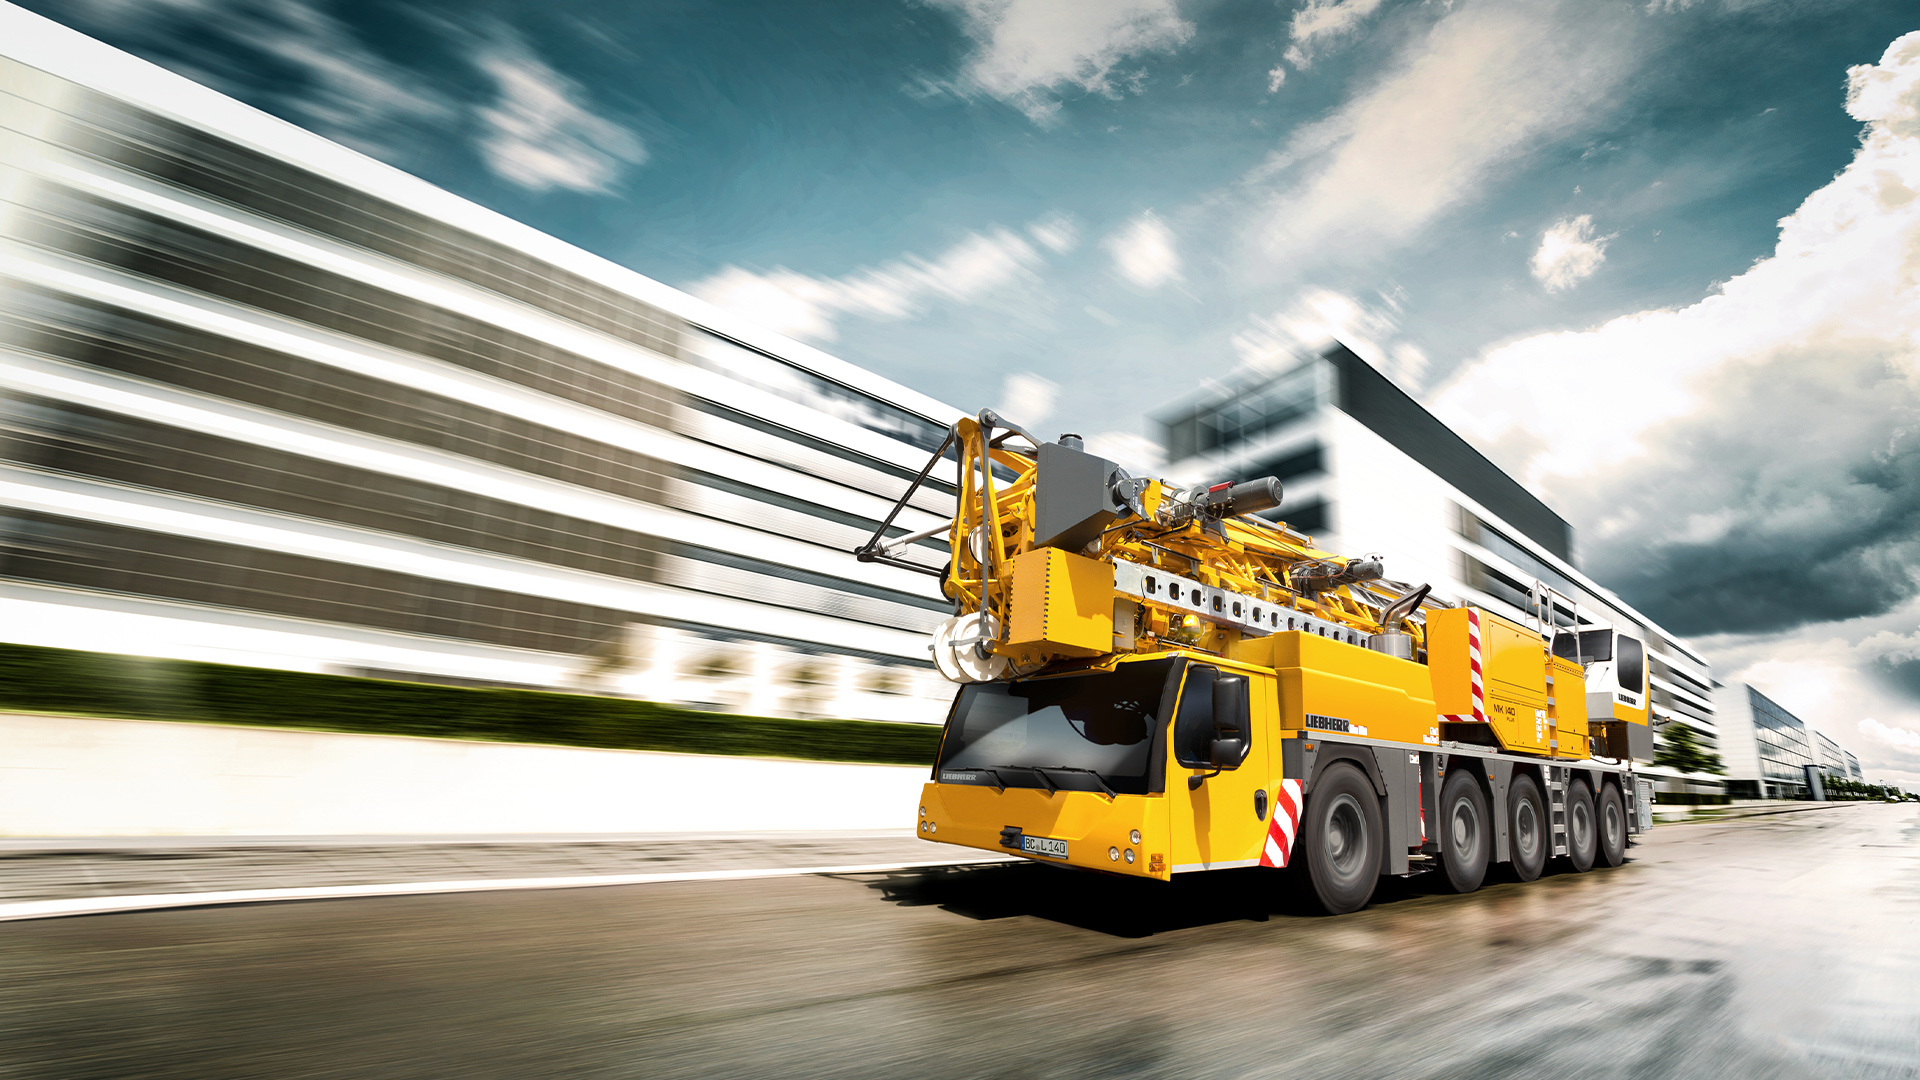 Tower Cranes and Mobile Construction Cranes - we offer solutions for you  lifting tasks